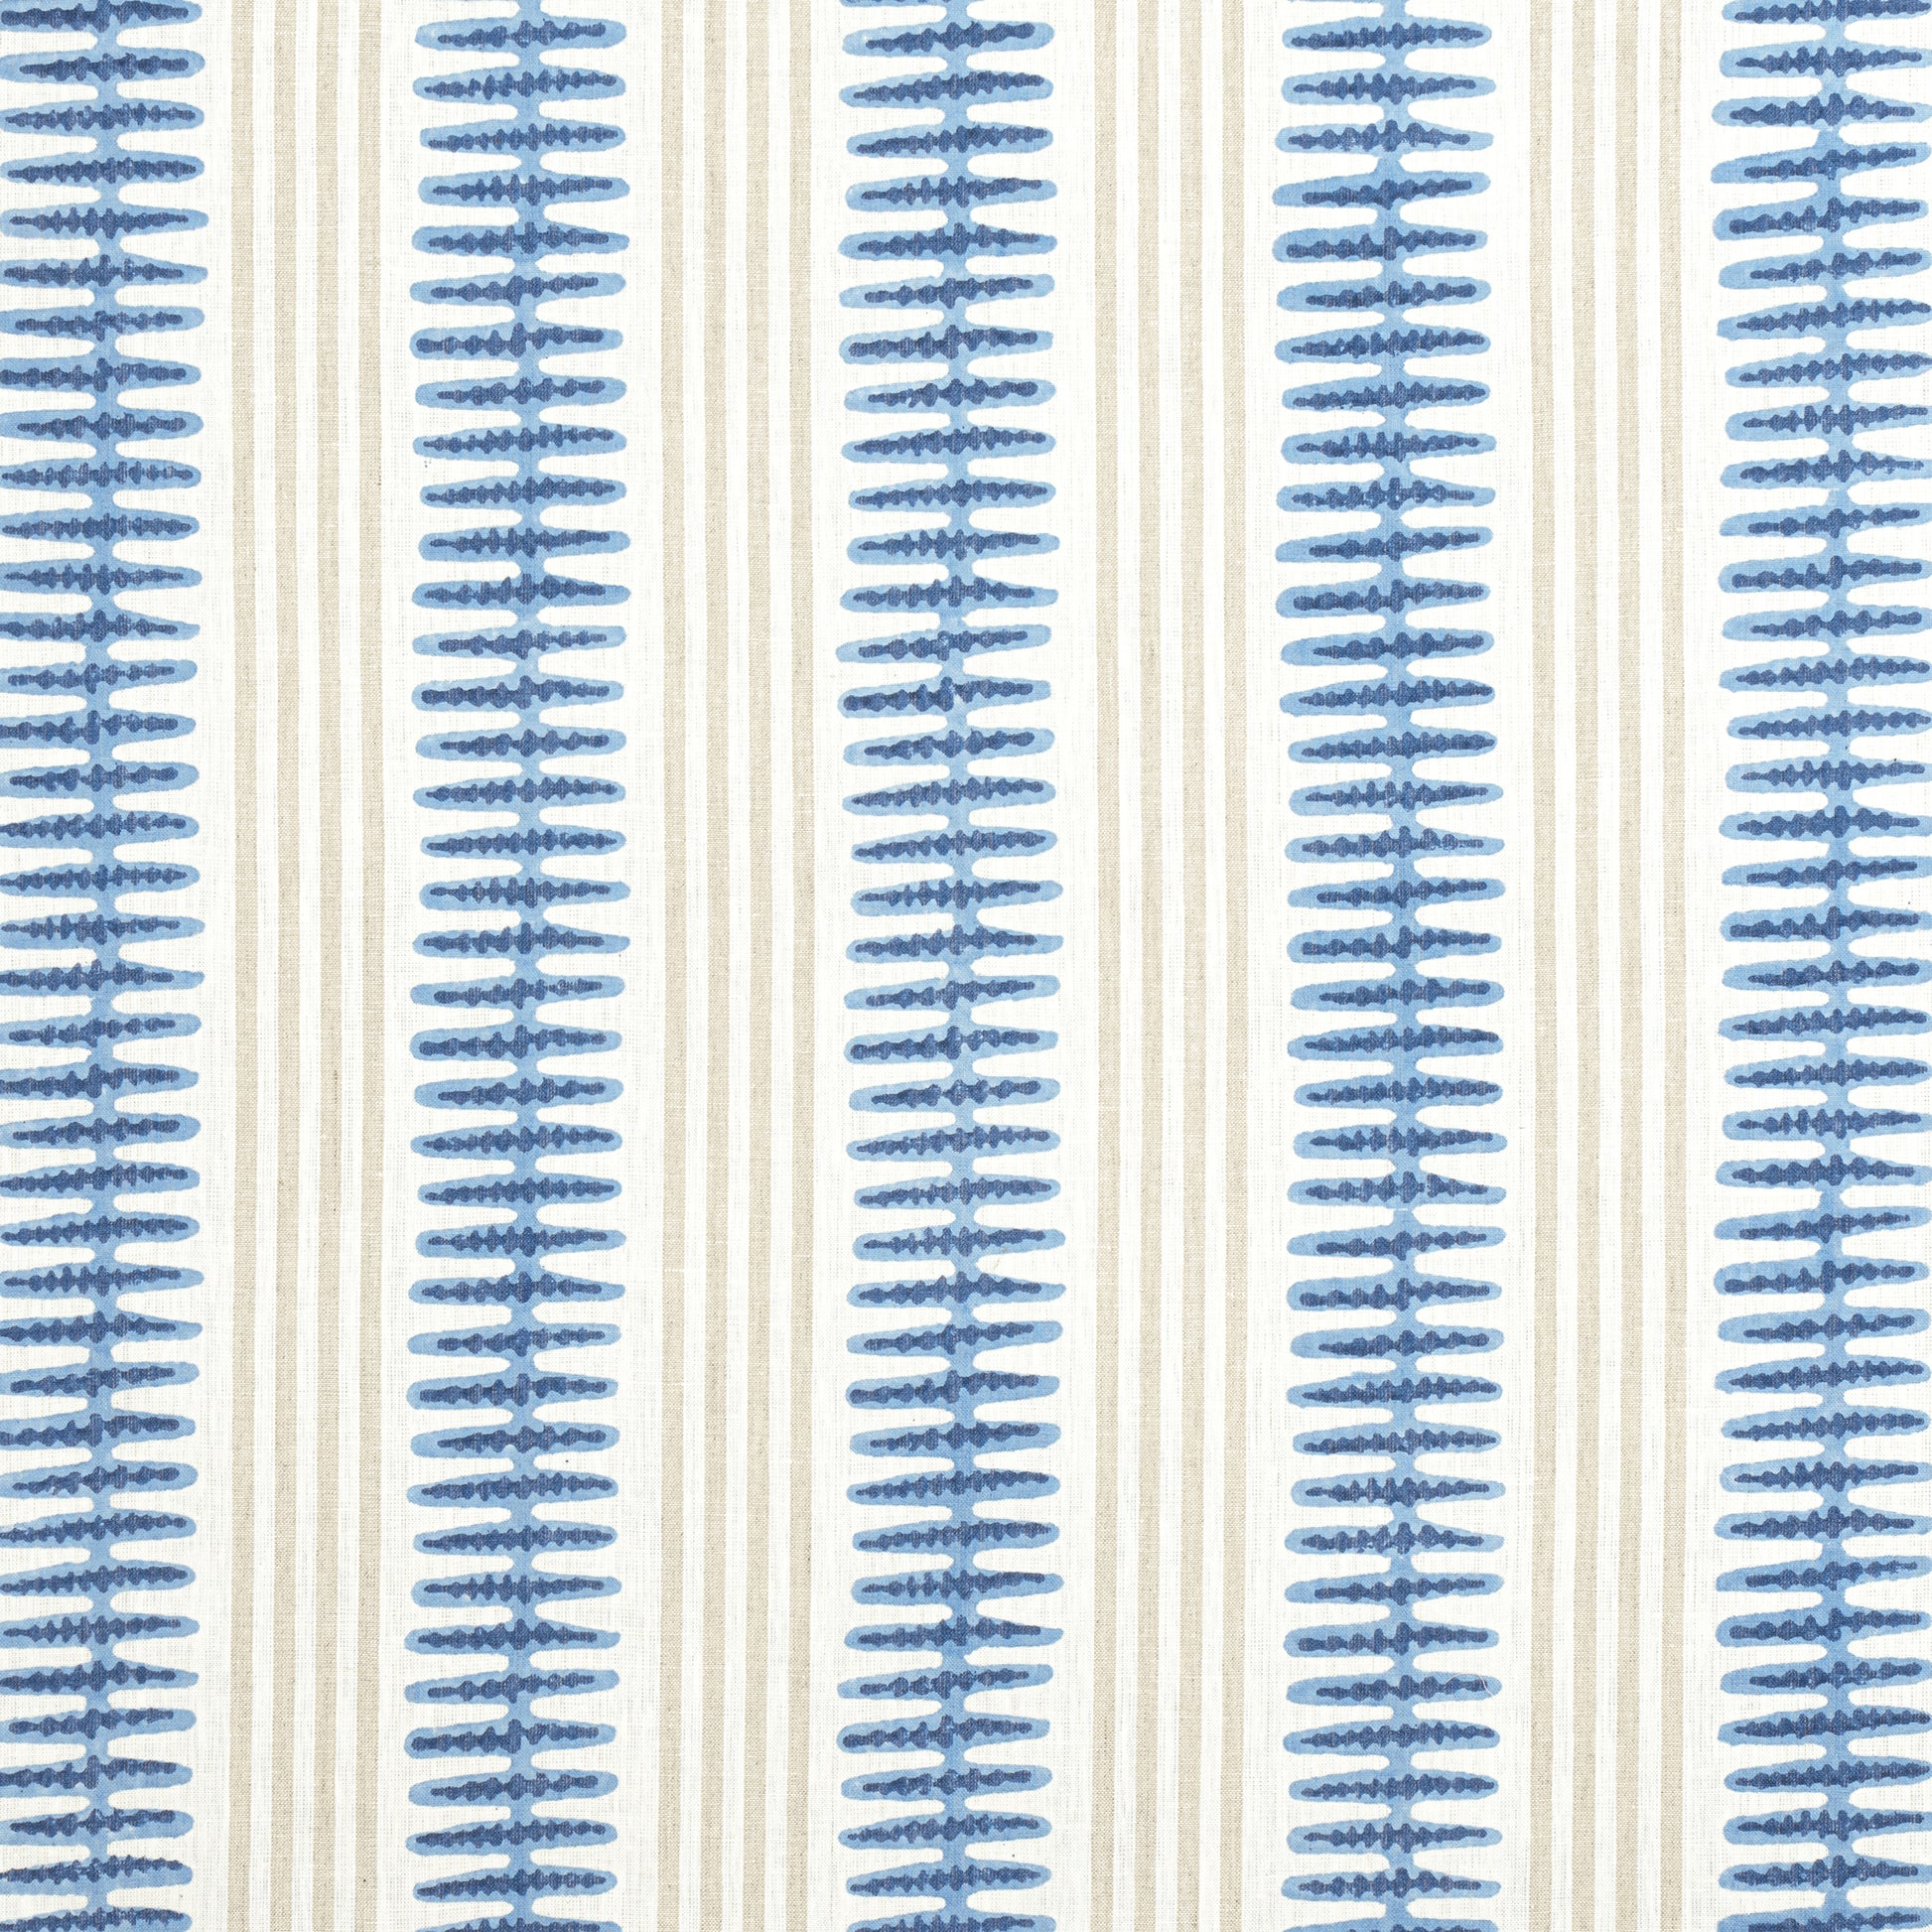 Purchase Thibaut Fabric SKU F981318 pattern name Indo Stripe color Navy